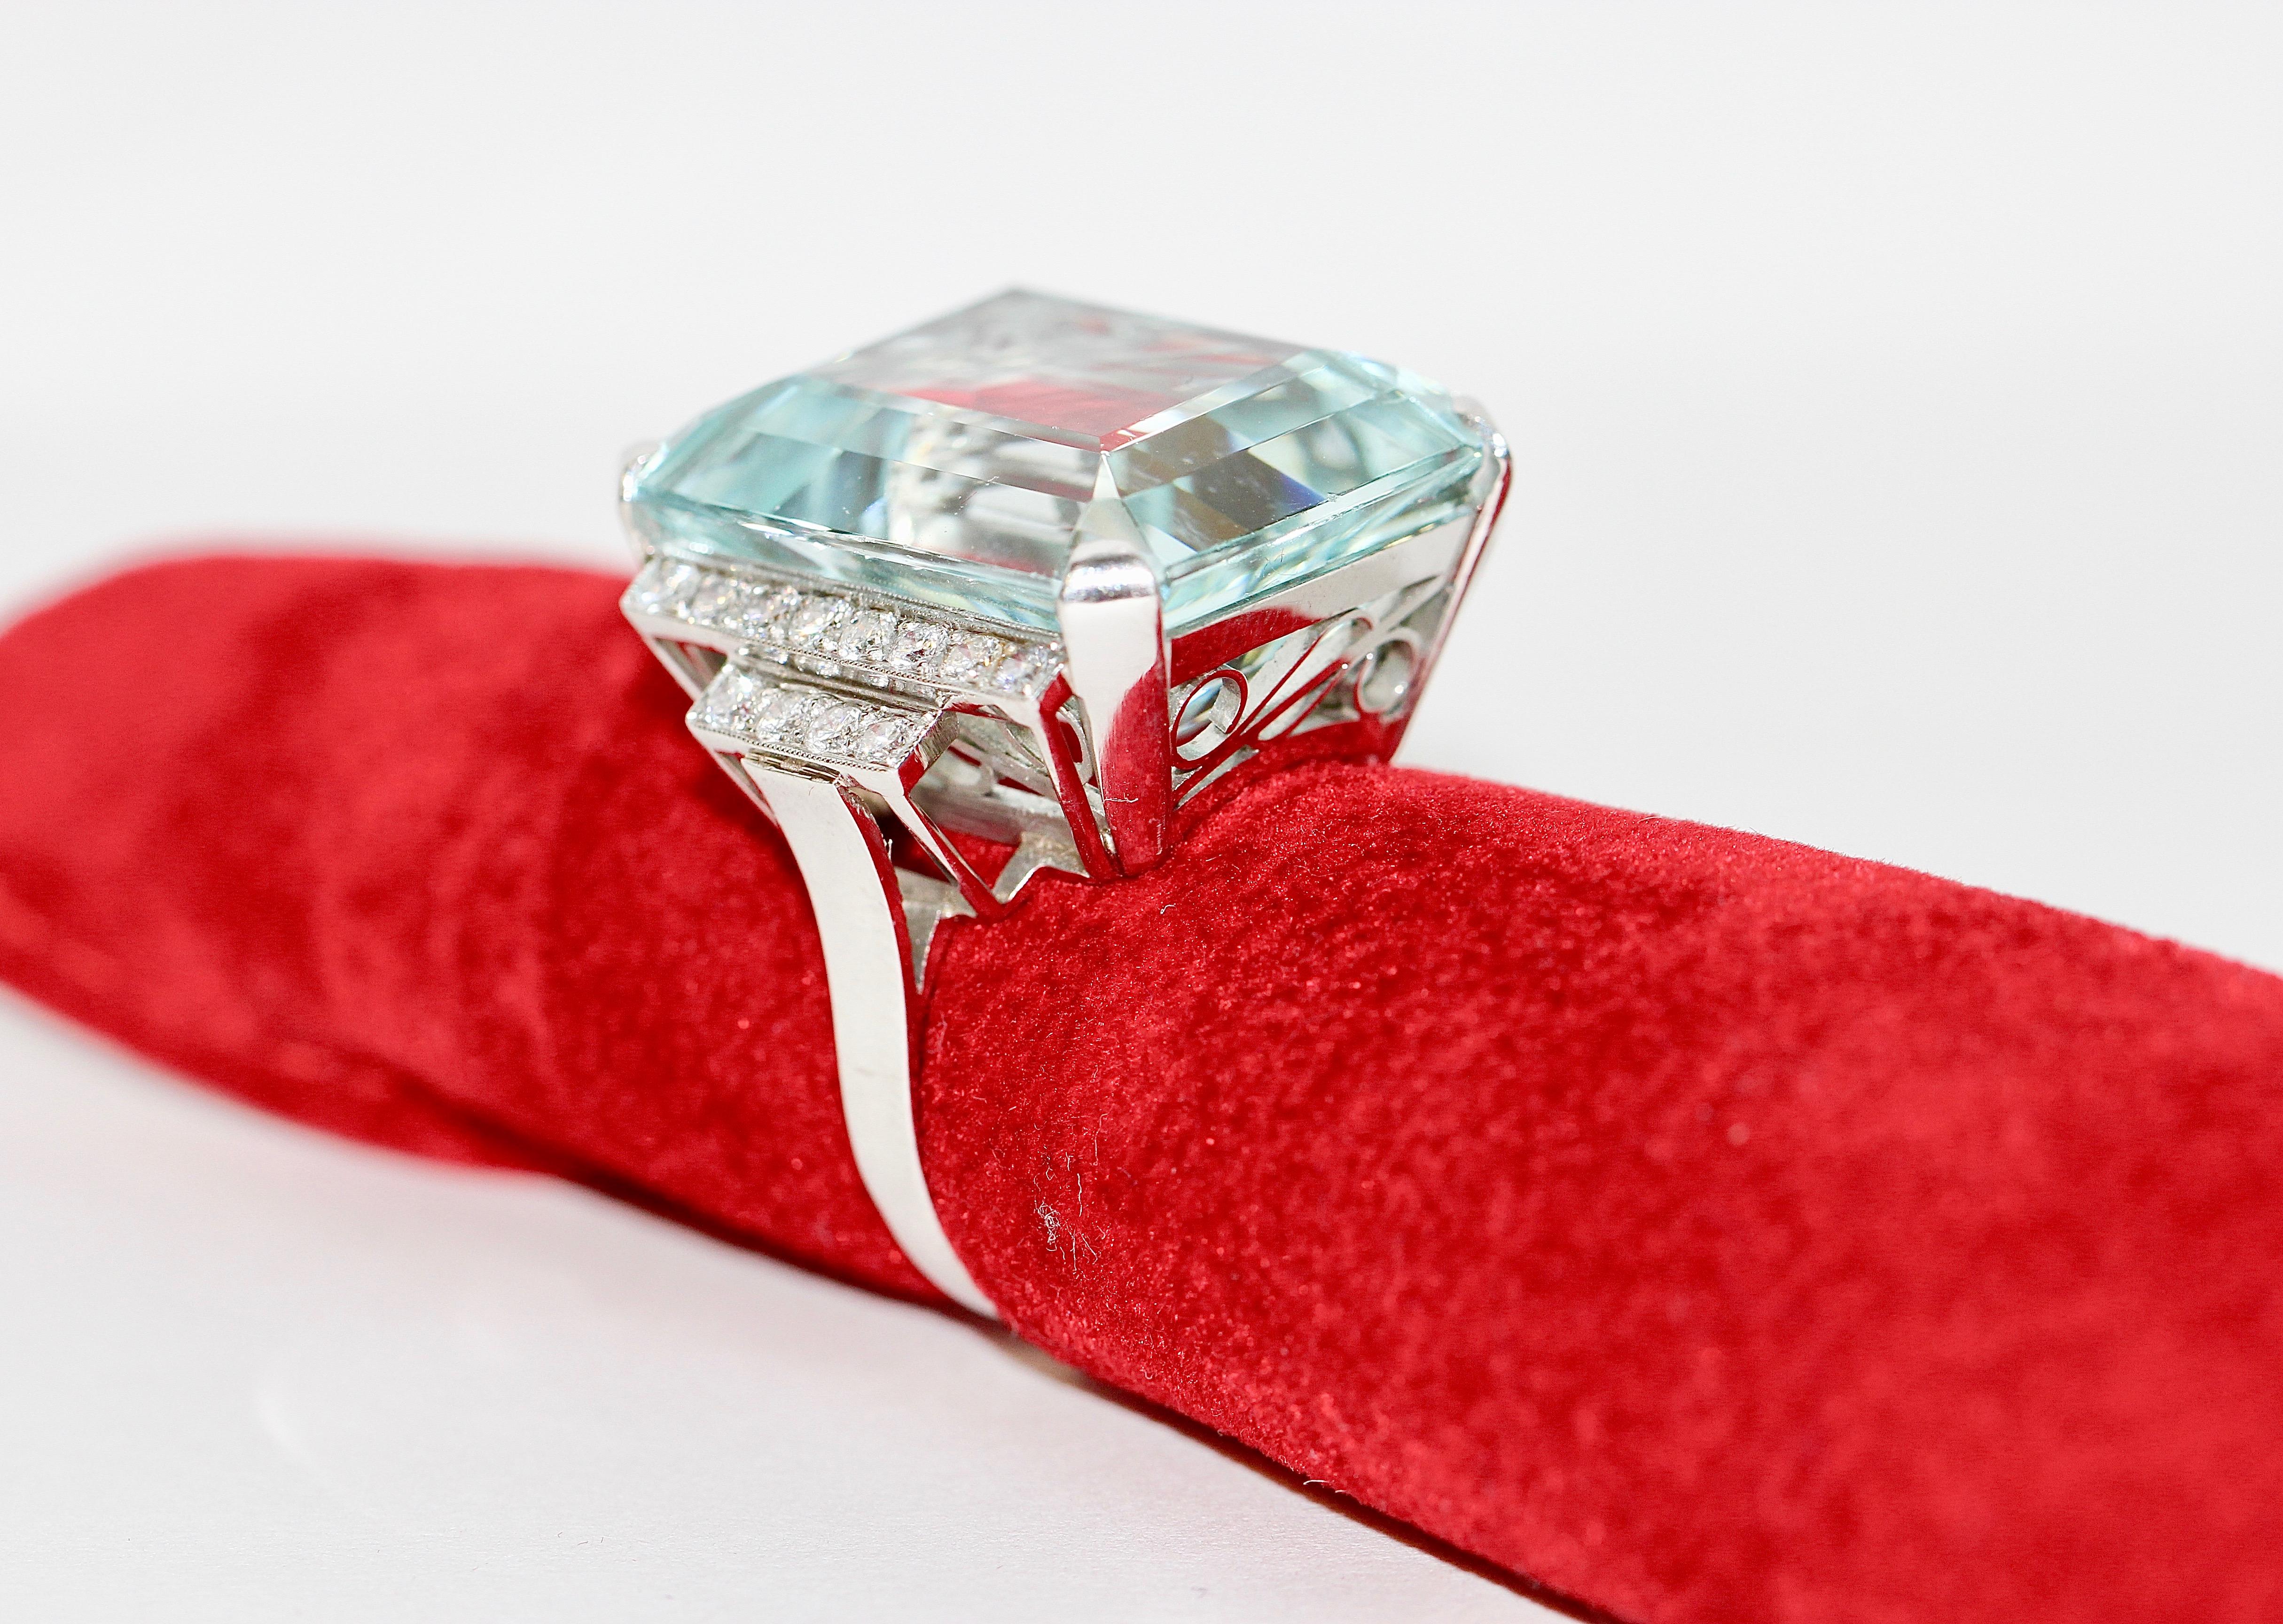 Women's Gorgeous 950 Platinum Ring with Large 34.8ct Faceted Aquamarine and 24 Diamonds For Sale